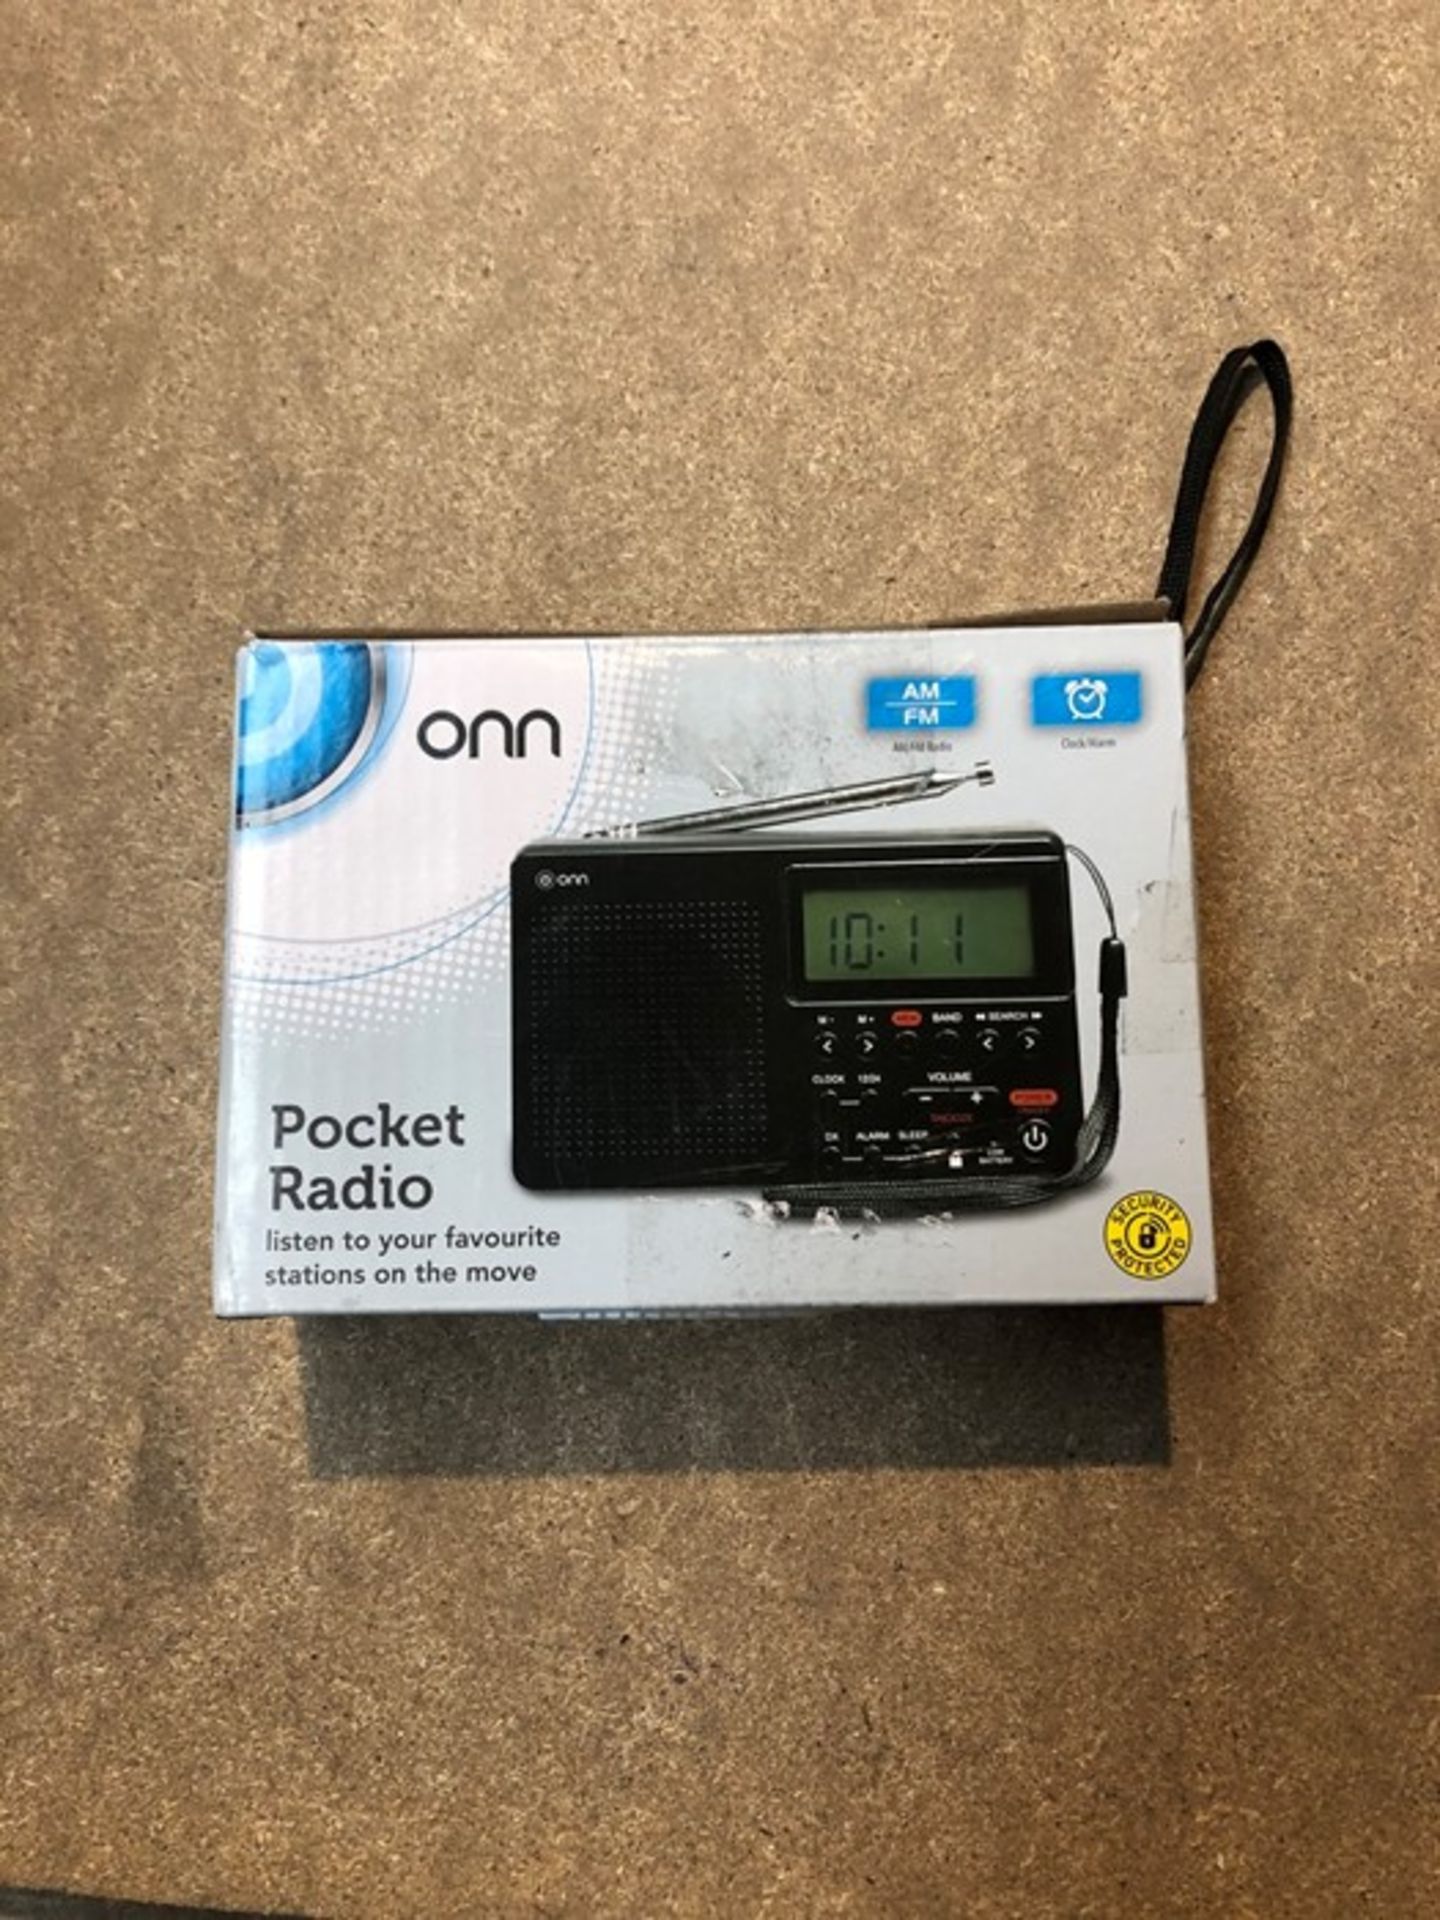 1 BOXED ONN POCKET RADIO IN BLACK / RRP £ 15.00 - BL -3813 (VIEWING HIGHLY RECOMMENDED)